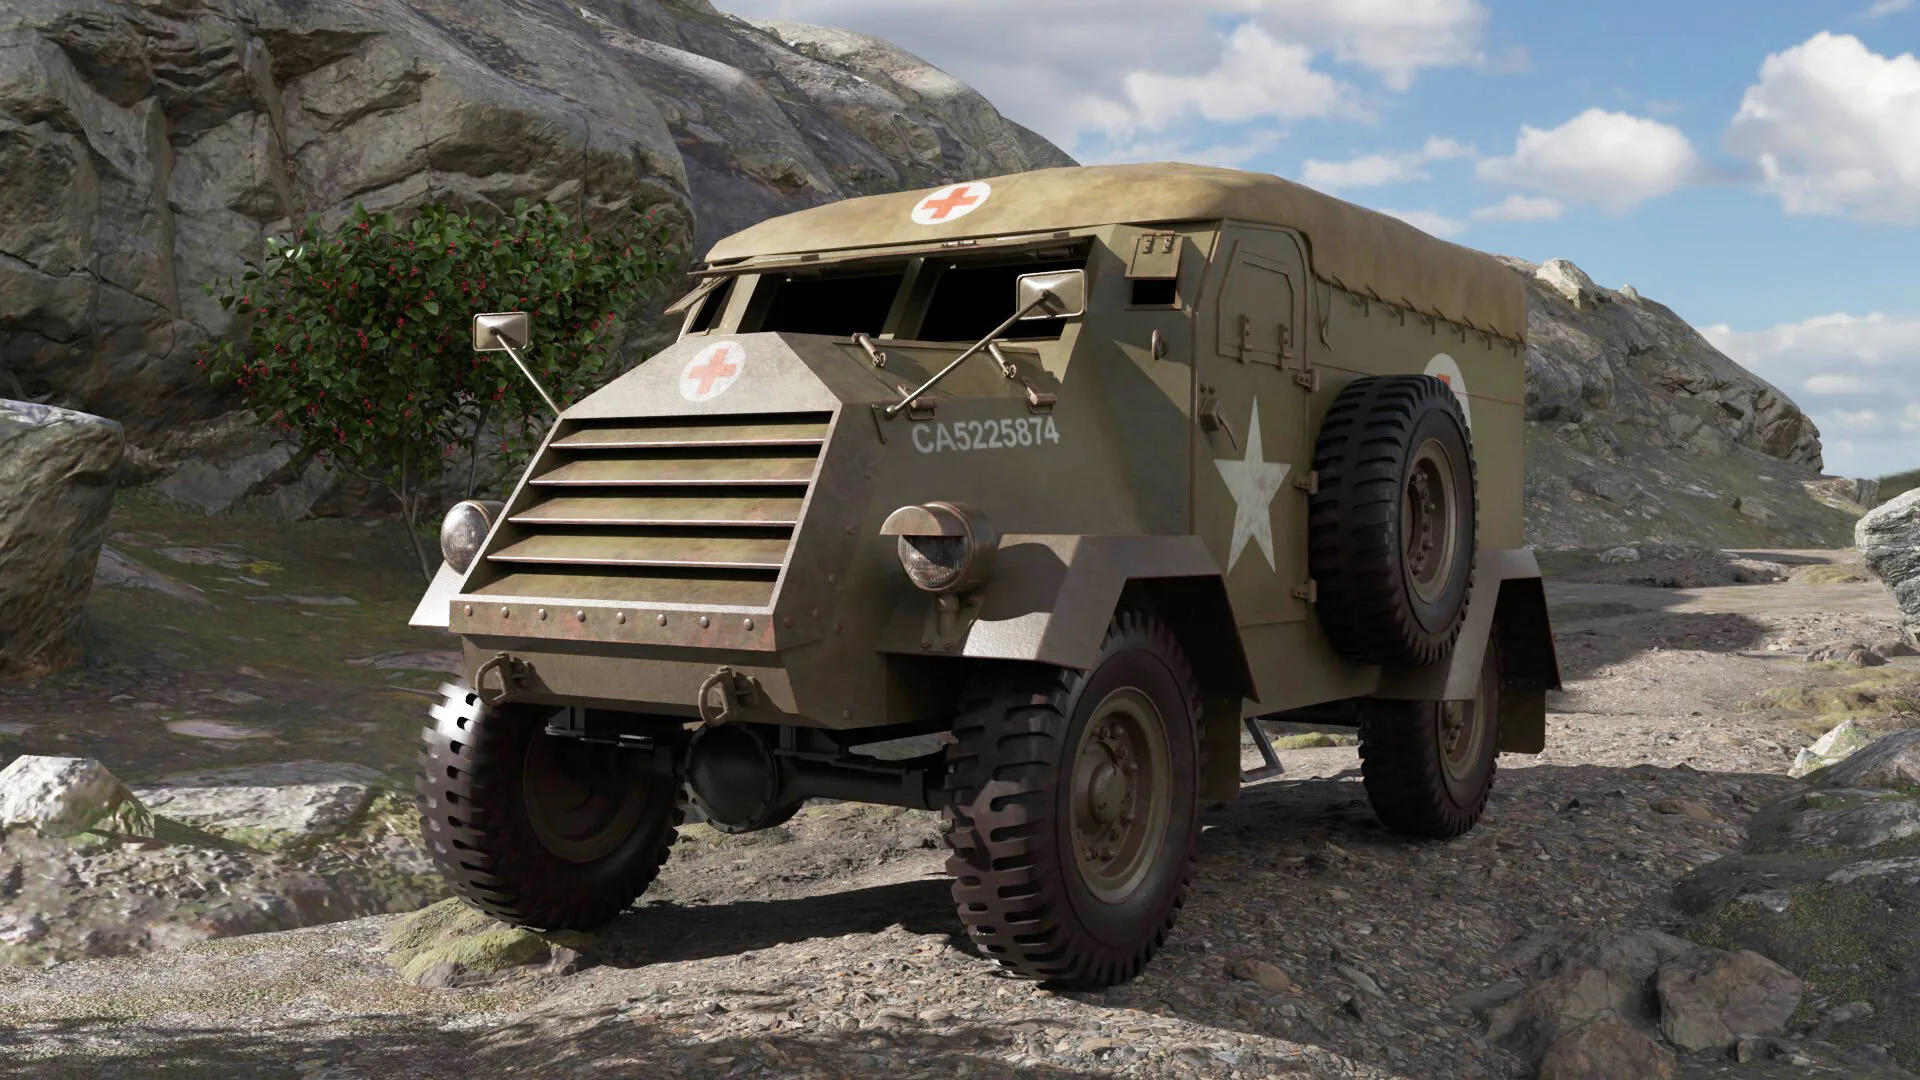 Create and Animate a Vehicle with Blender and Substance Painter